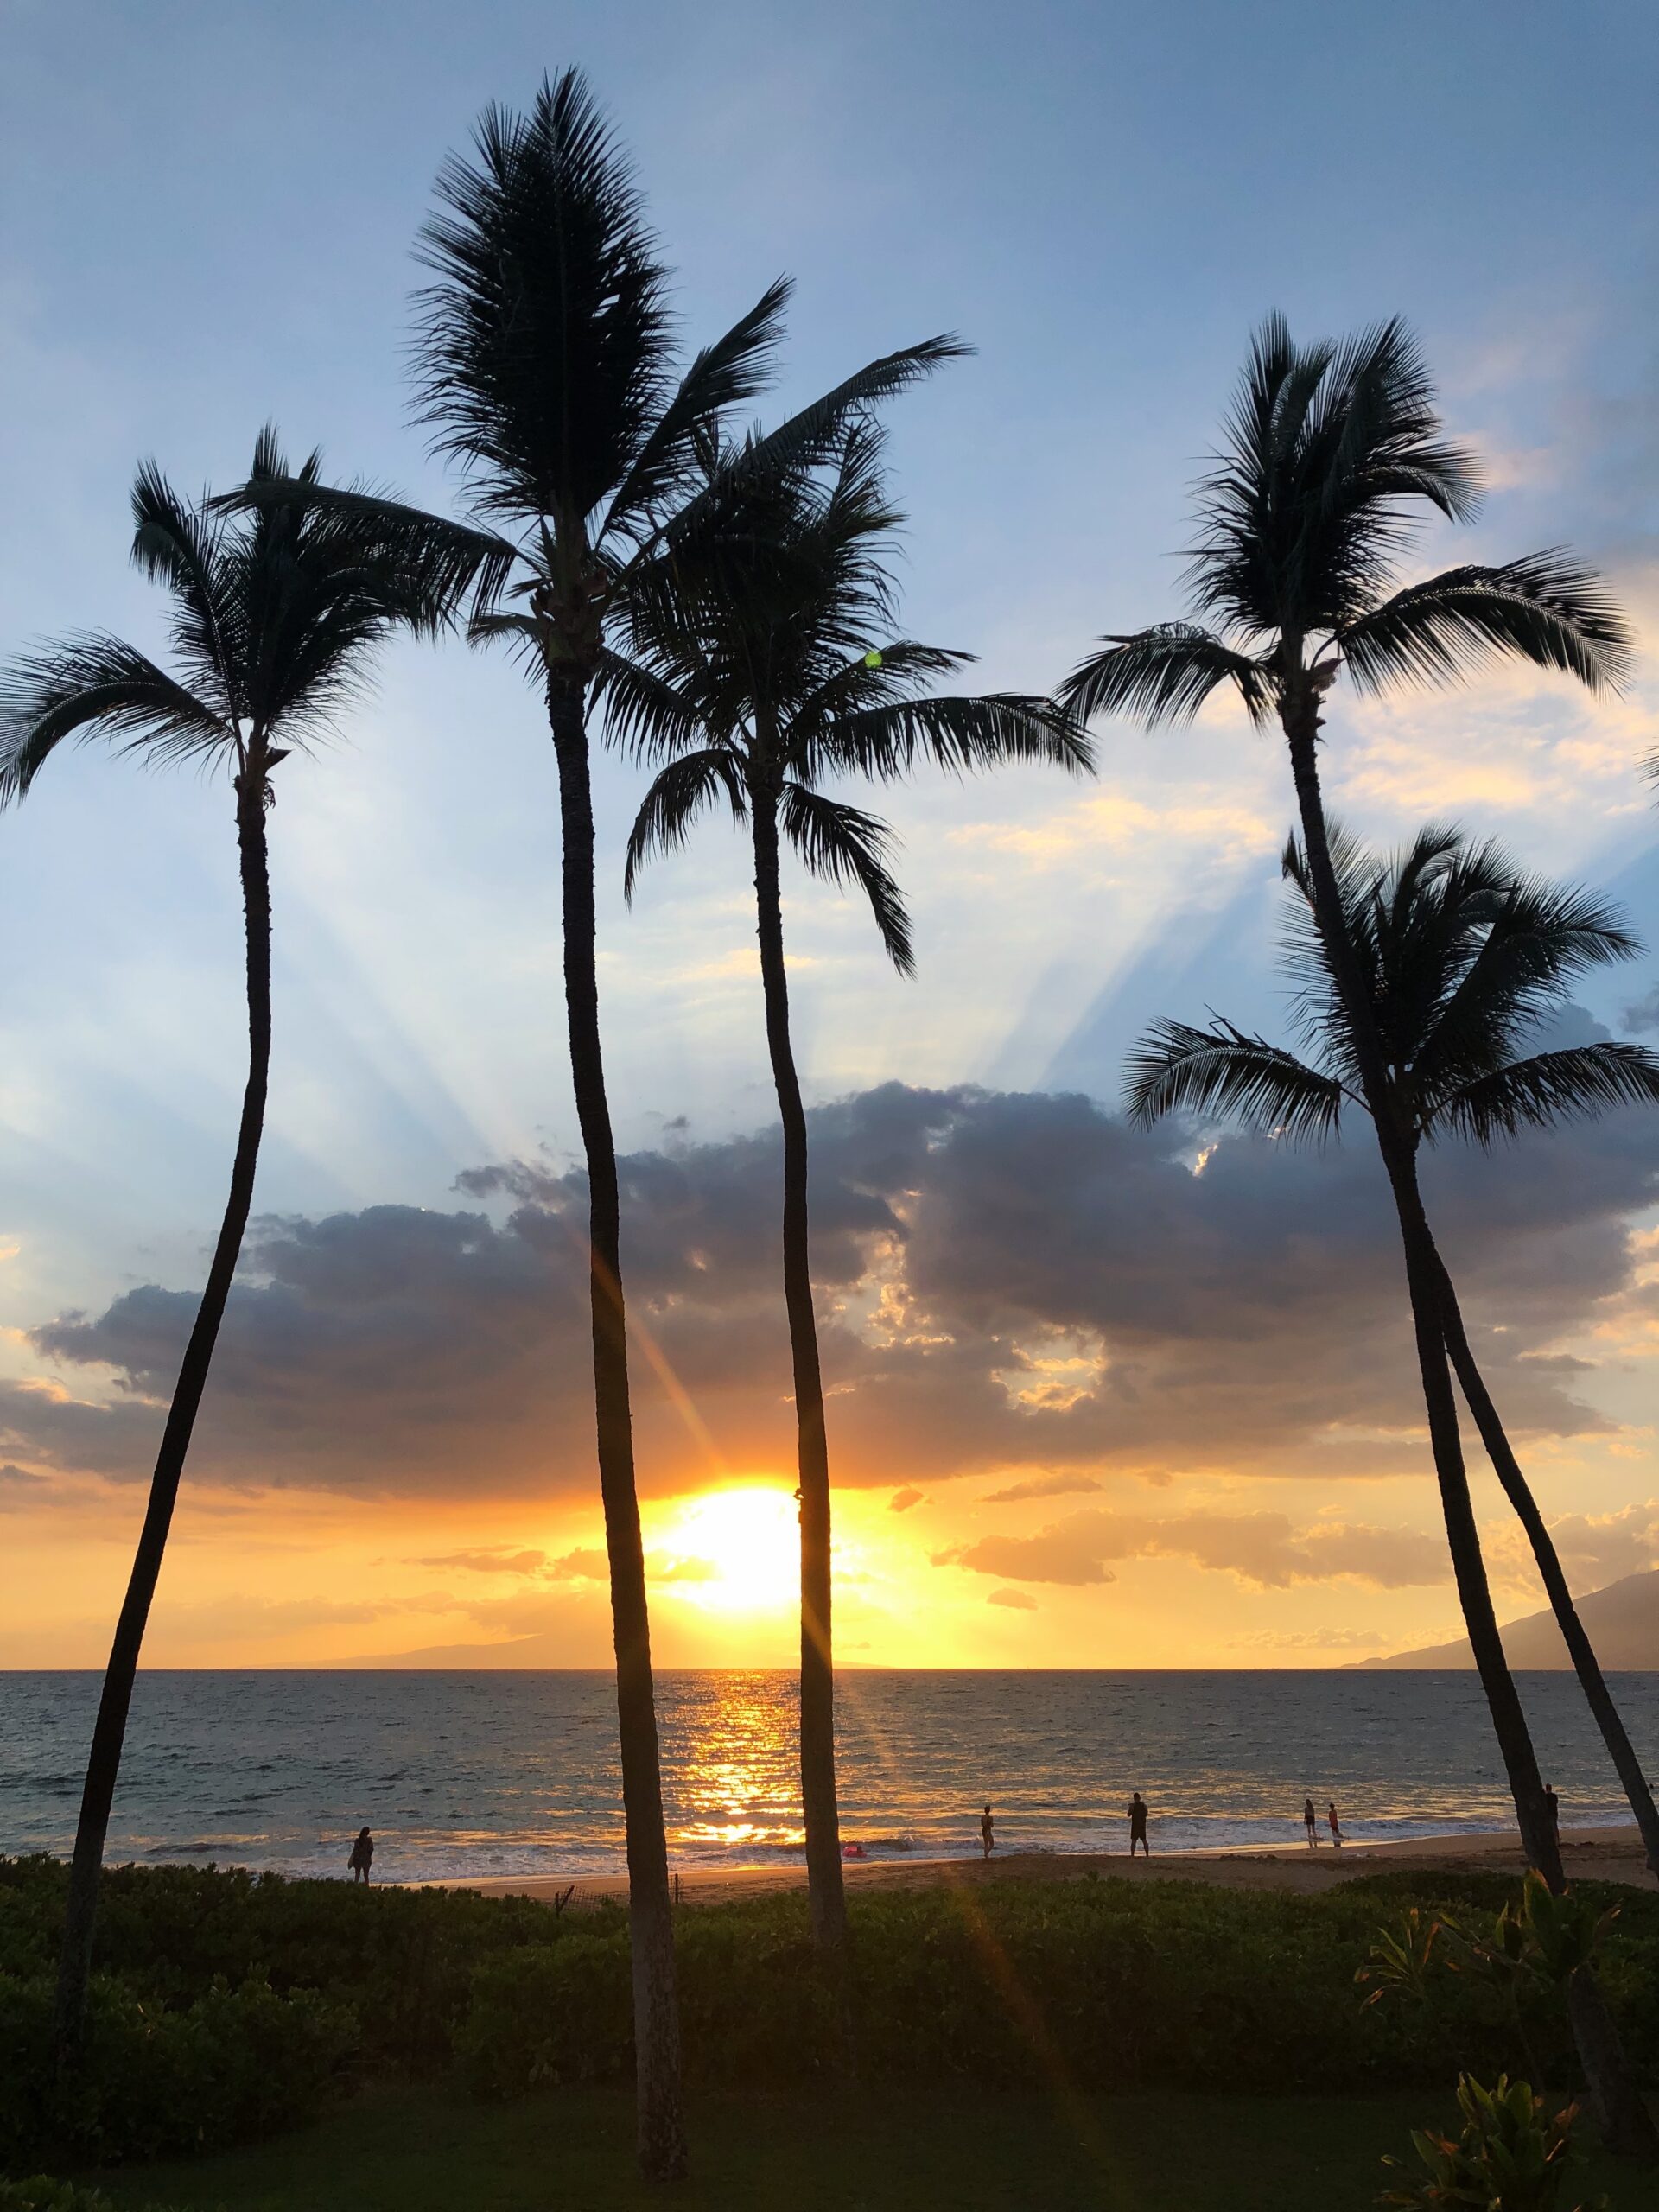 13 Unique Things to Do in Maui, Hawaii: A Local’s Guide